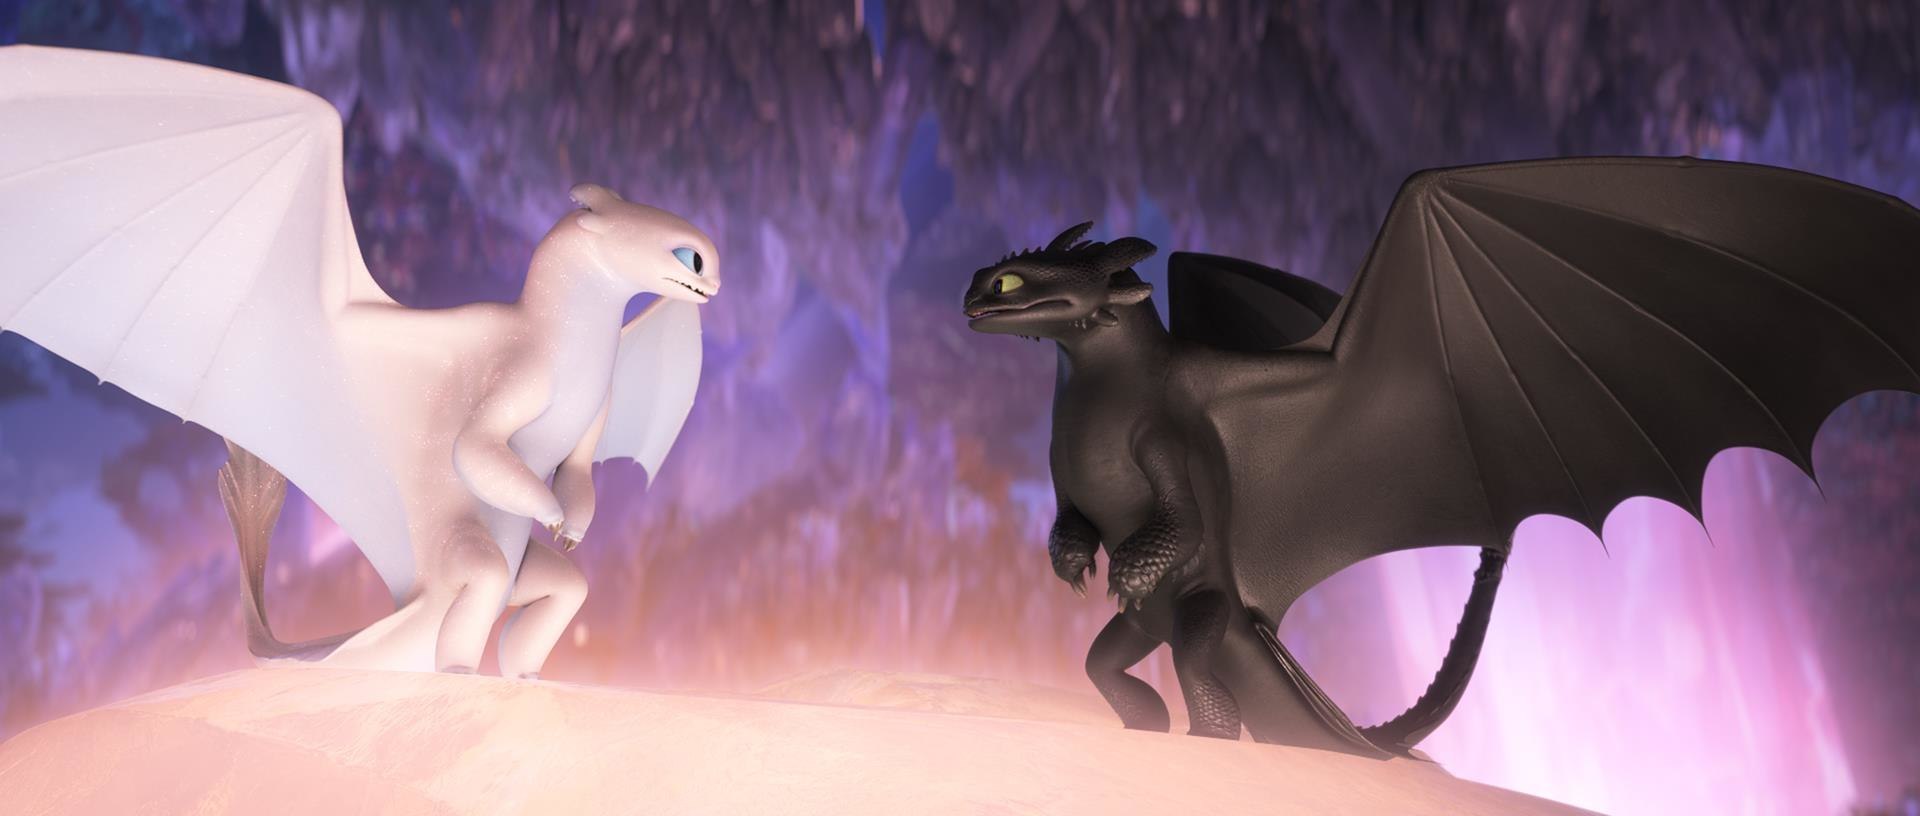 Dragons: The Nine Realms Clip Introduces a New Two-Headed Dragon (Exclusive)